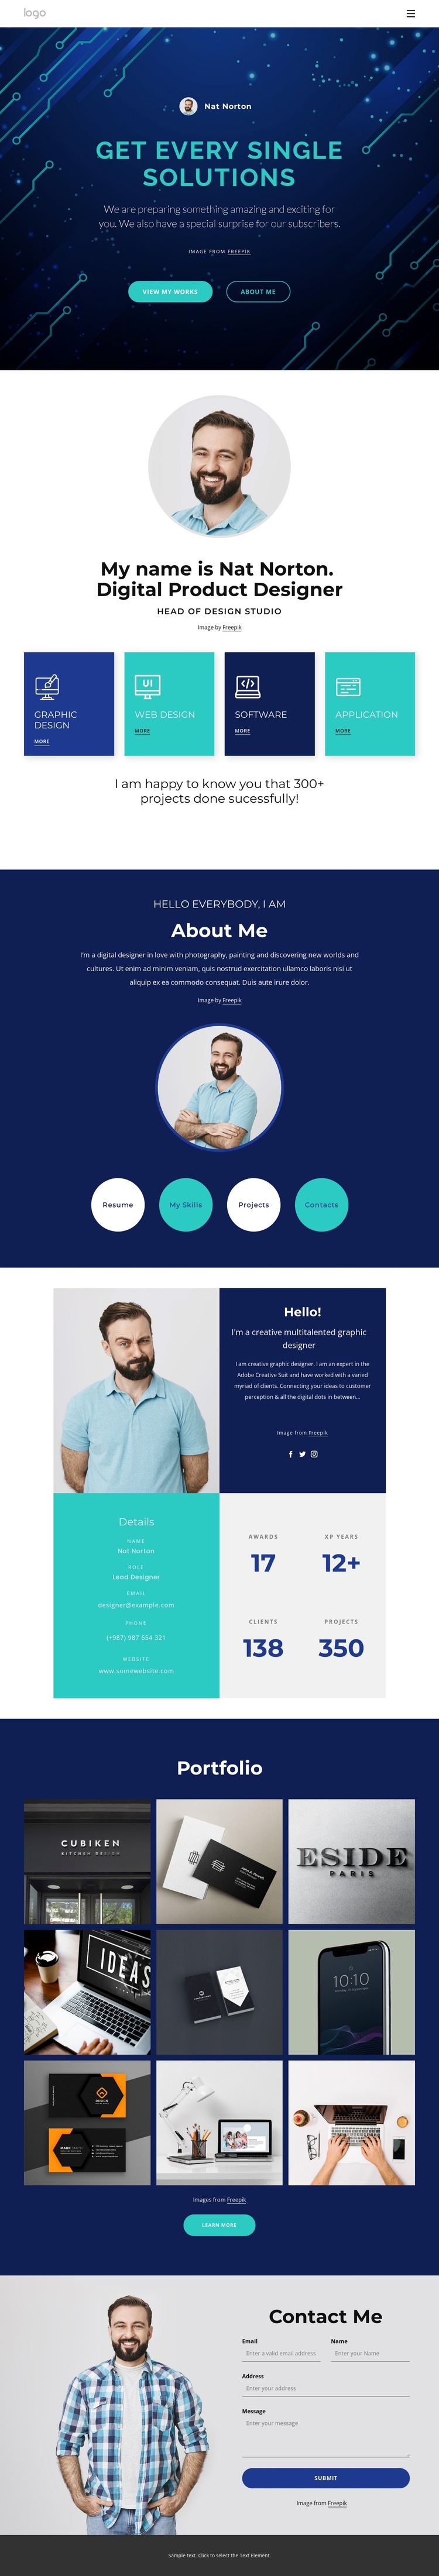 Design solutions HTML5 Template